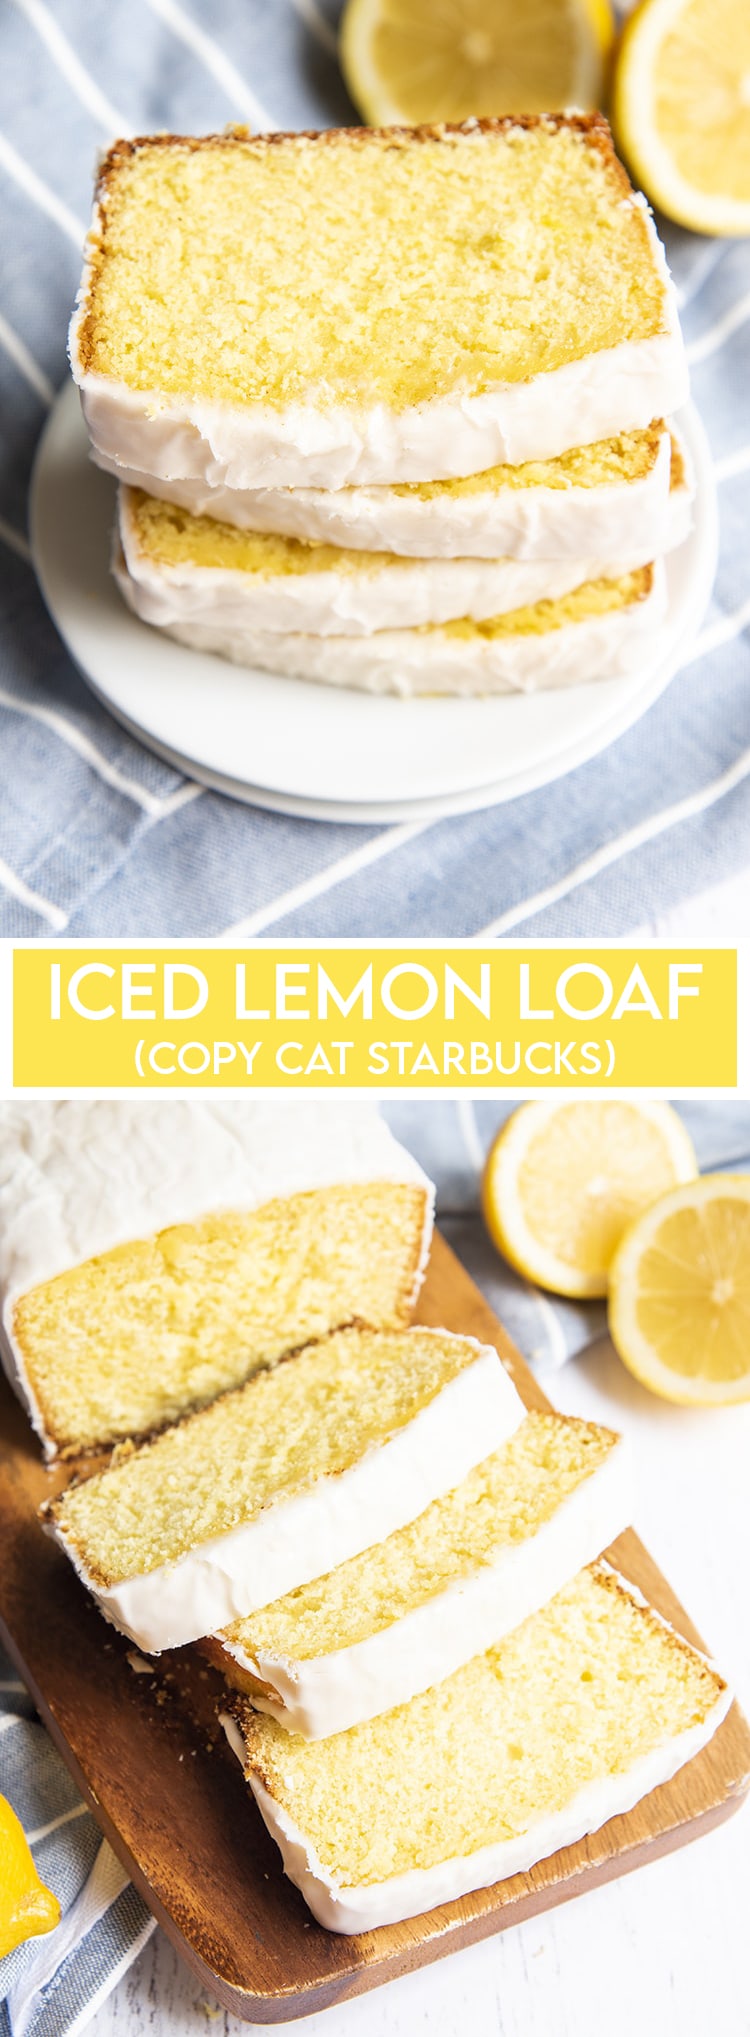 Iced Lemon loaf displayed in a collage with text that reads iced lemon loaf (copy cat starbucks).